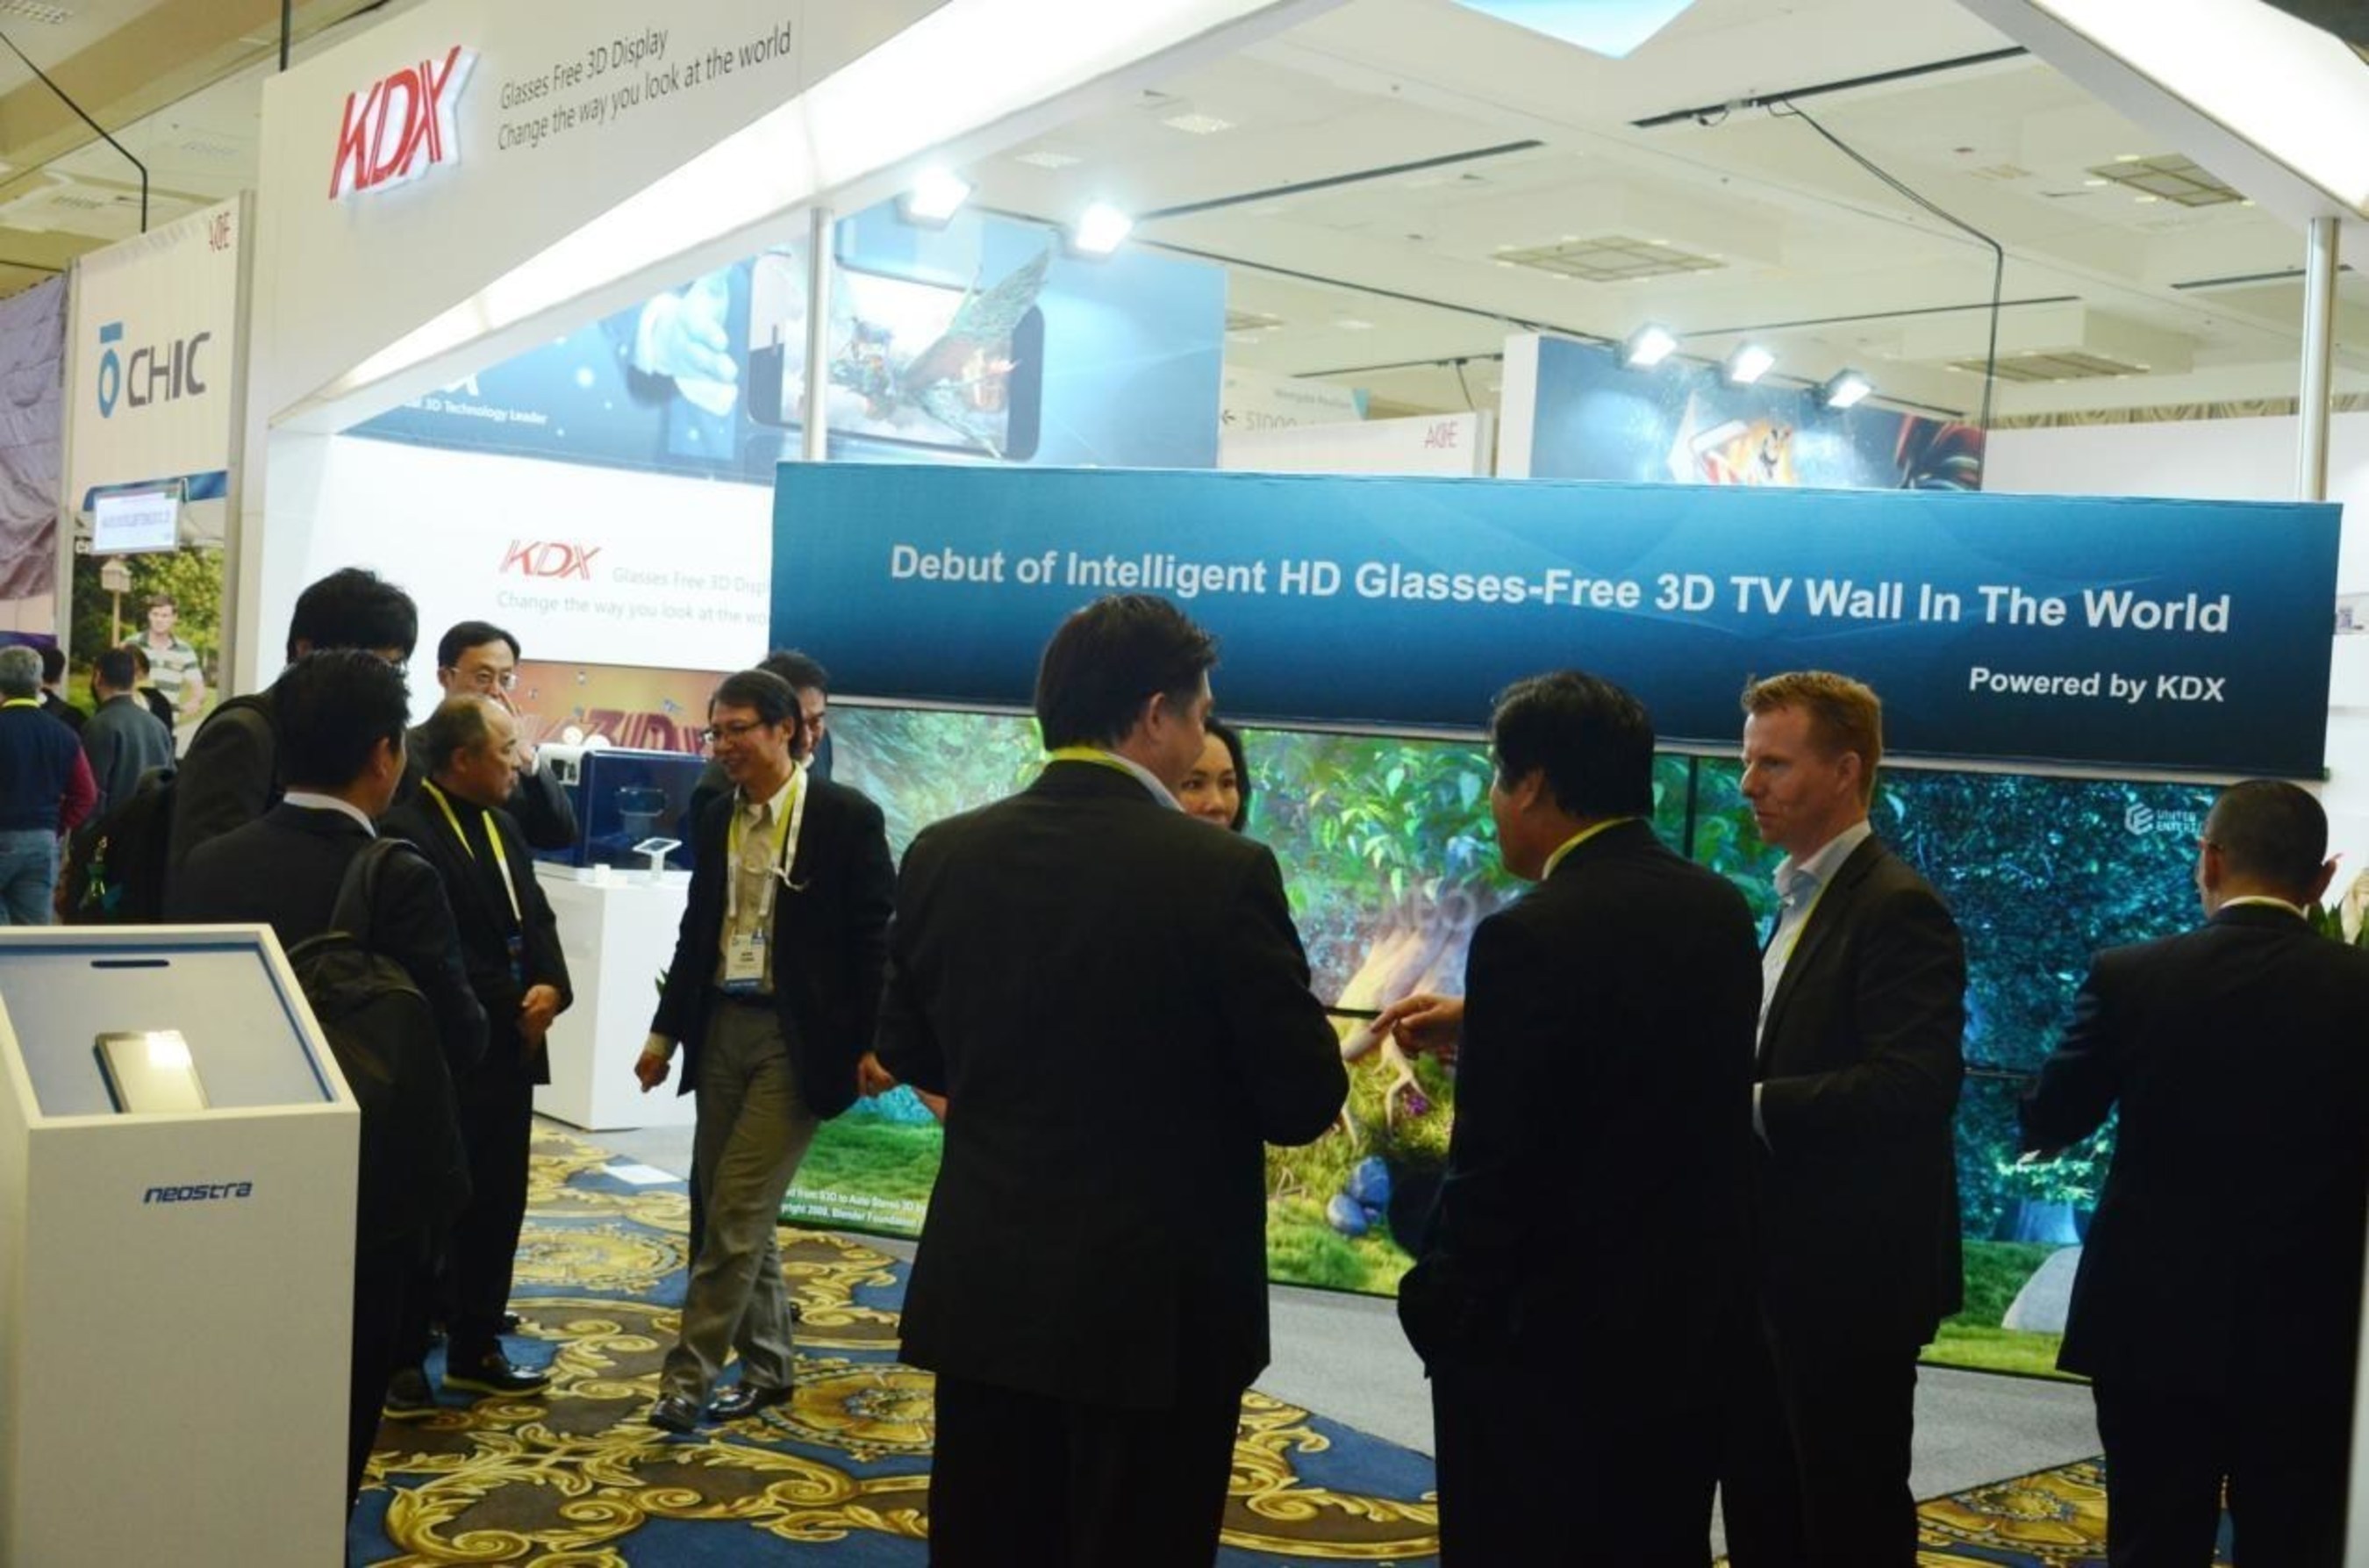 Debut of intelligent HD glasses-free 3D TV wall attracted much attention